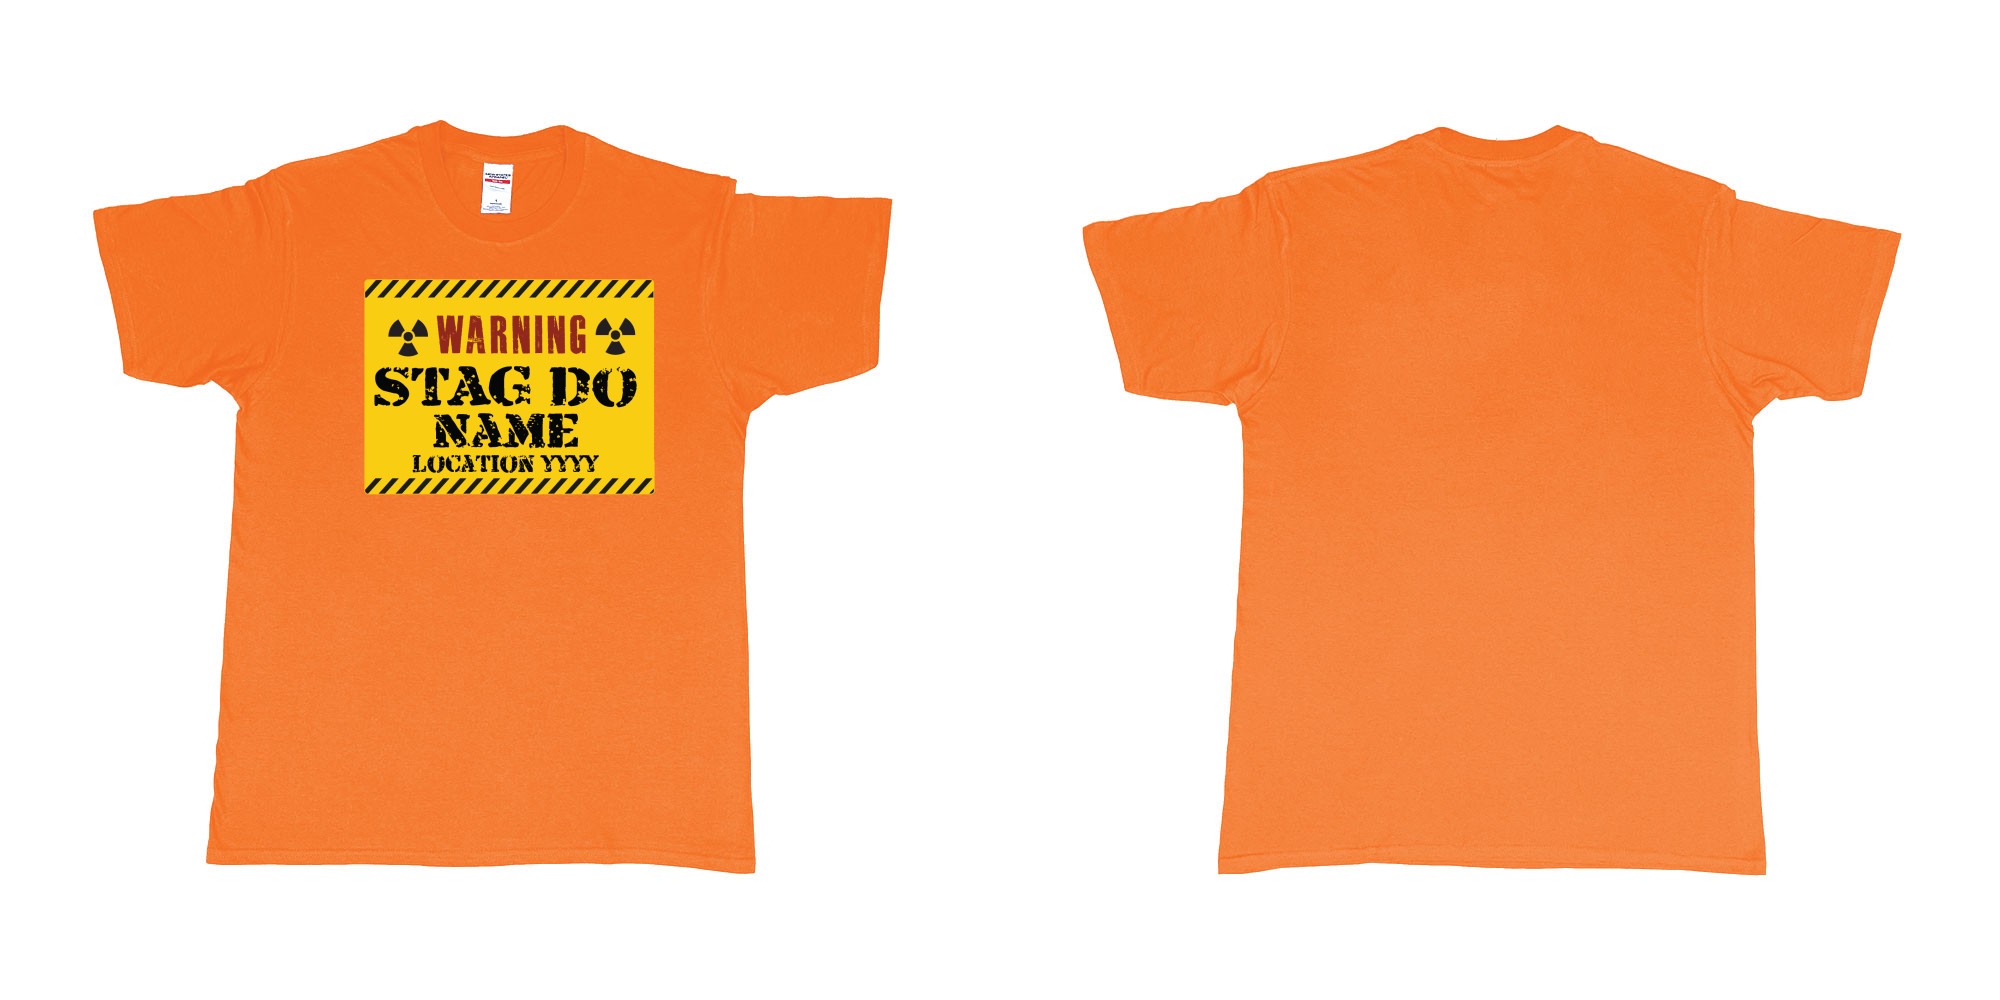 Custom tshirt design Warning Stag Do Location in fabric color orange choice your own text made in Bali by The Pirate Way